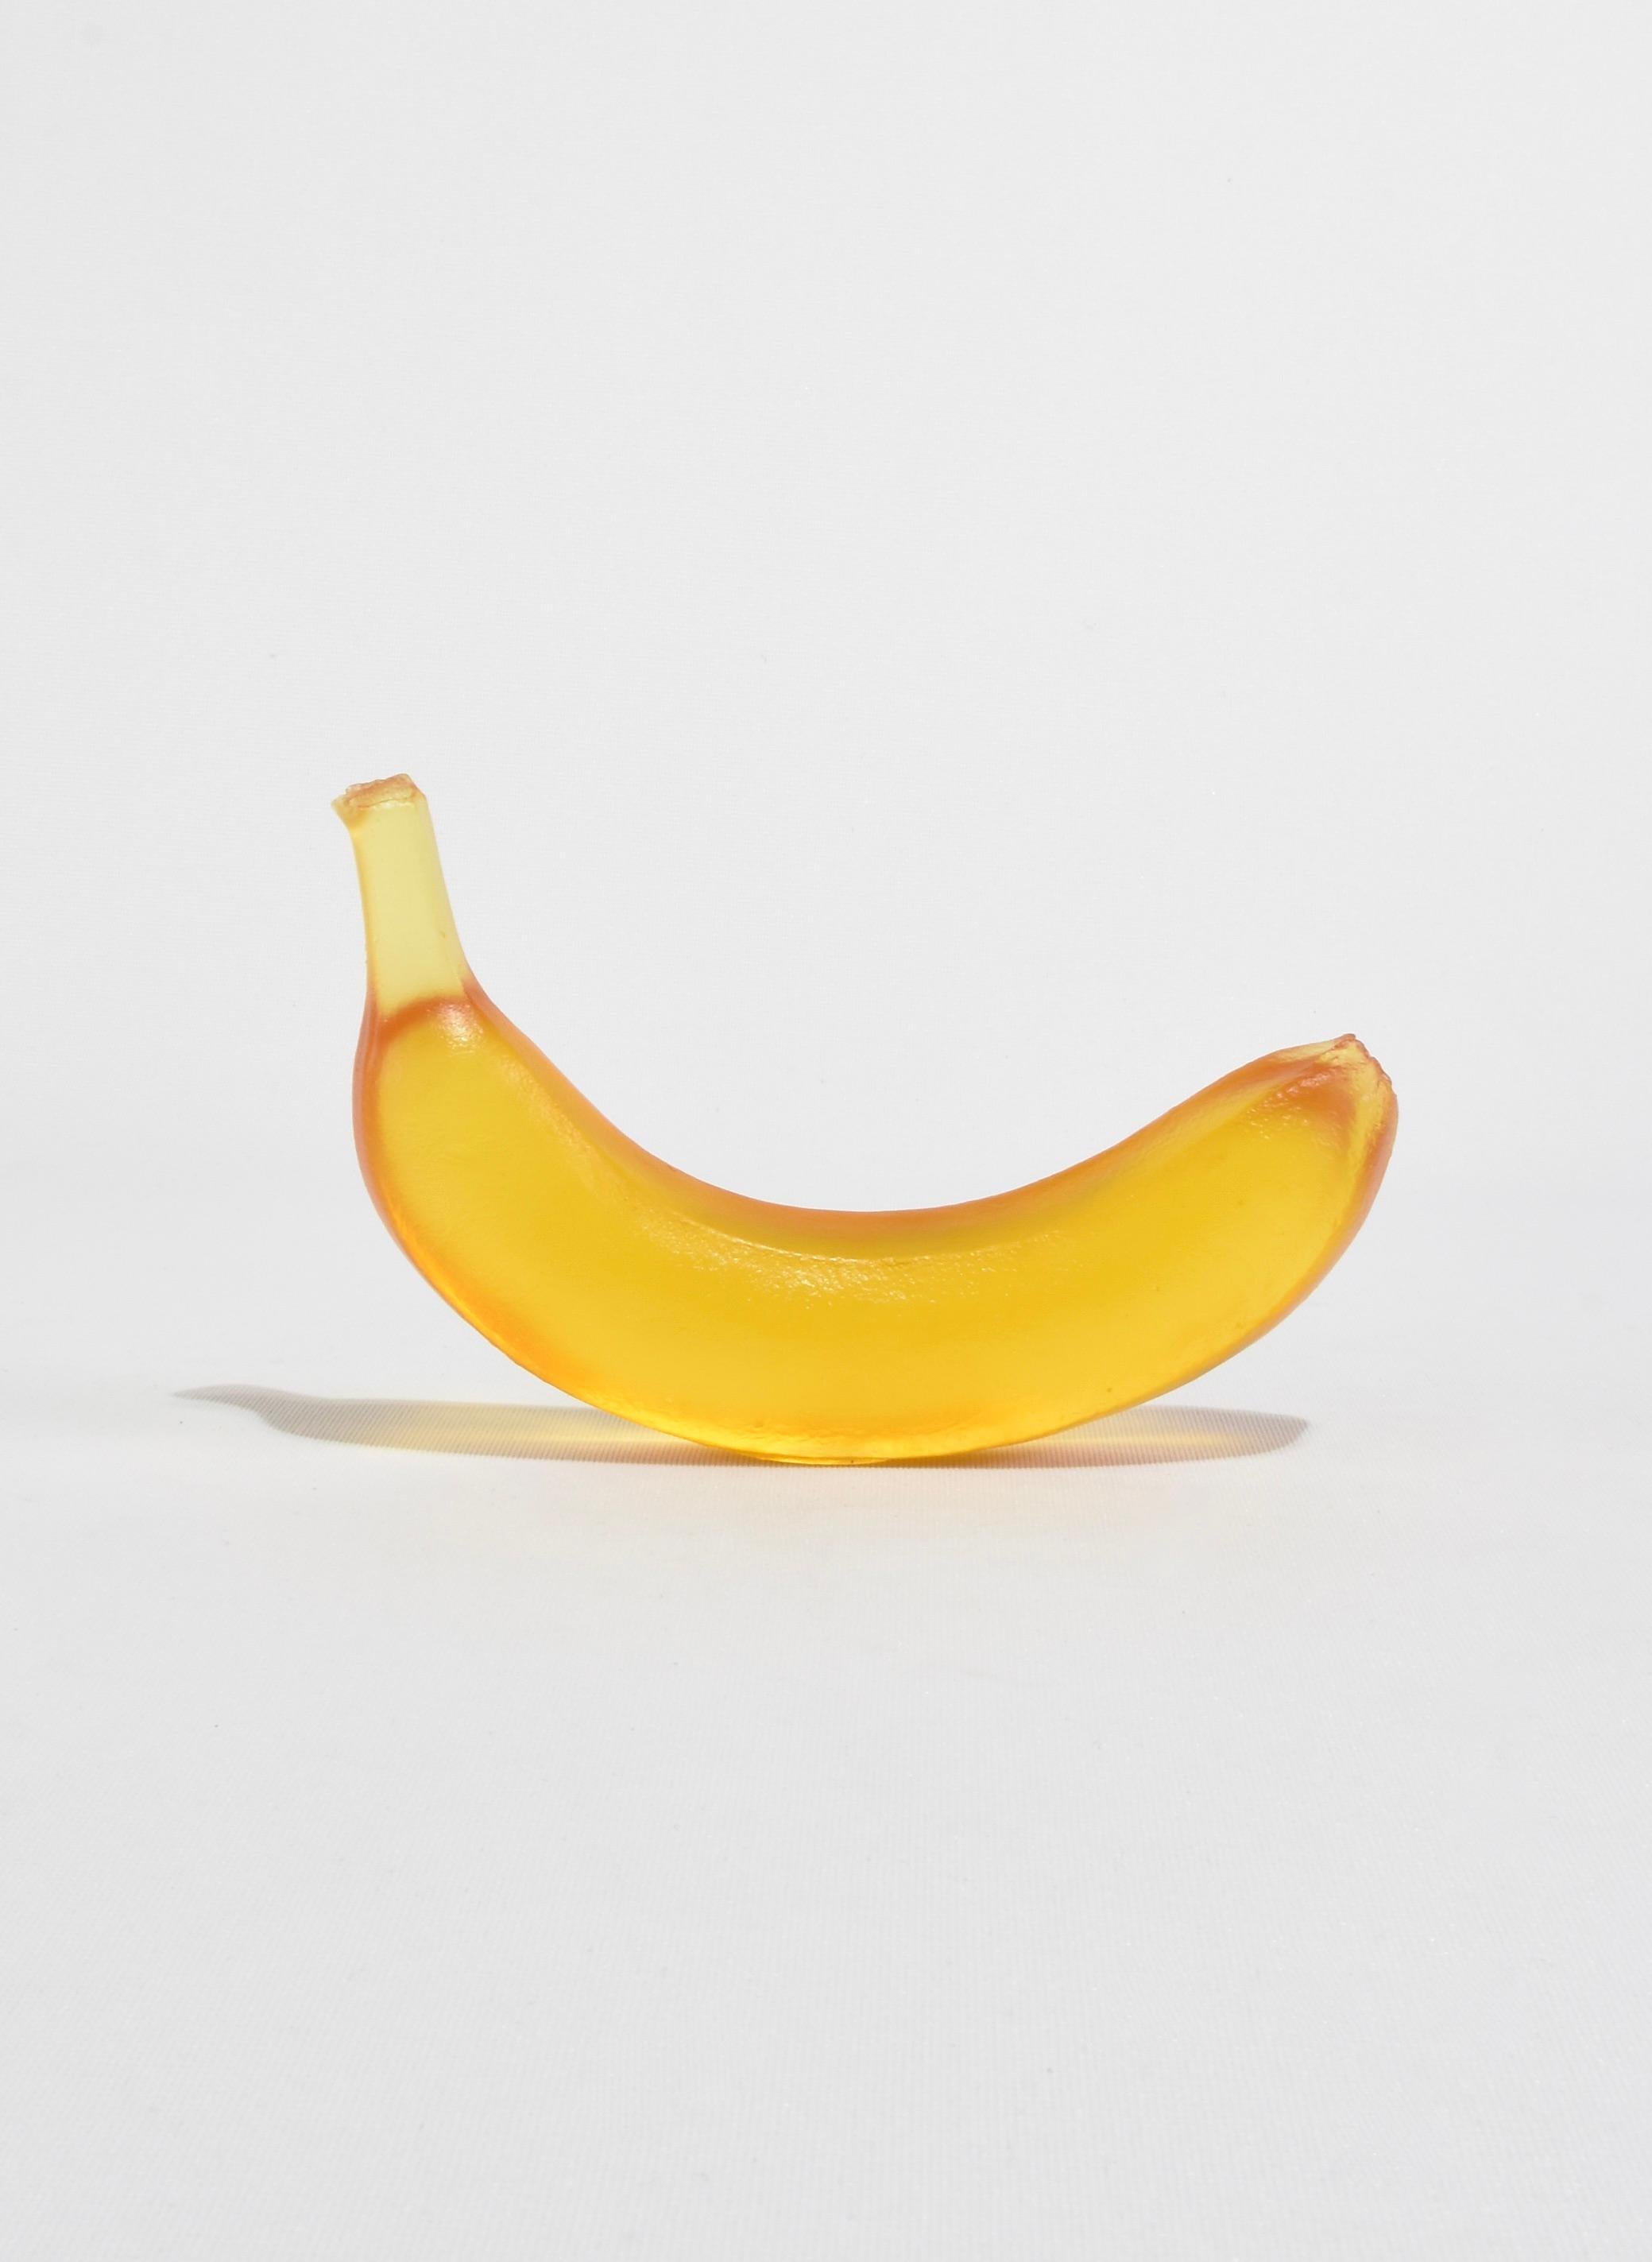 Casted glass banana in honey by Devon Made inspired by blown glass fruit makers and collectors from the 1960's. The light playful approach to everyday fruit is contrasted with the heaviness of the crystal glass, a unique material that catches and